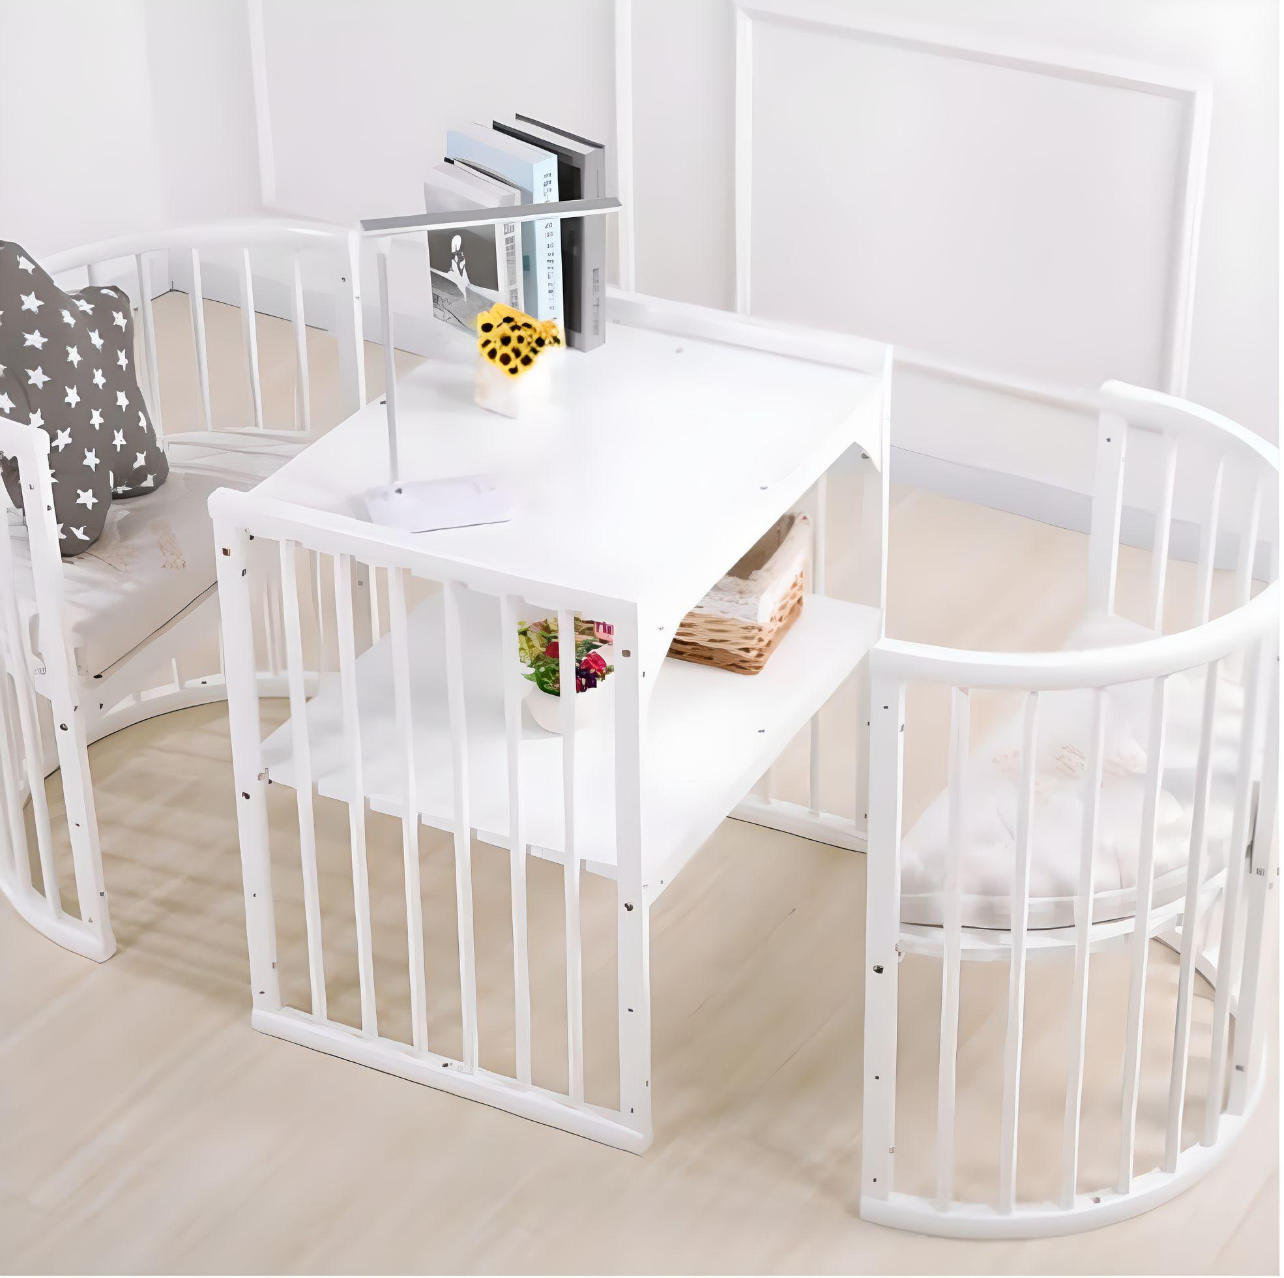 Evelyn 6 in 1 Multifunctional European Oval Pinewood Crib Cot (White). Newborn - 15 Years